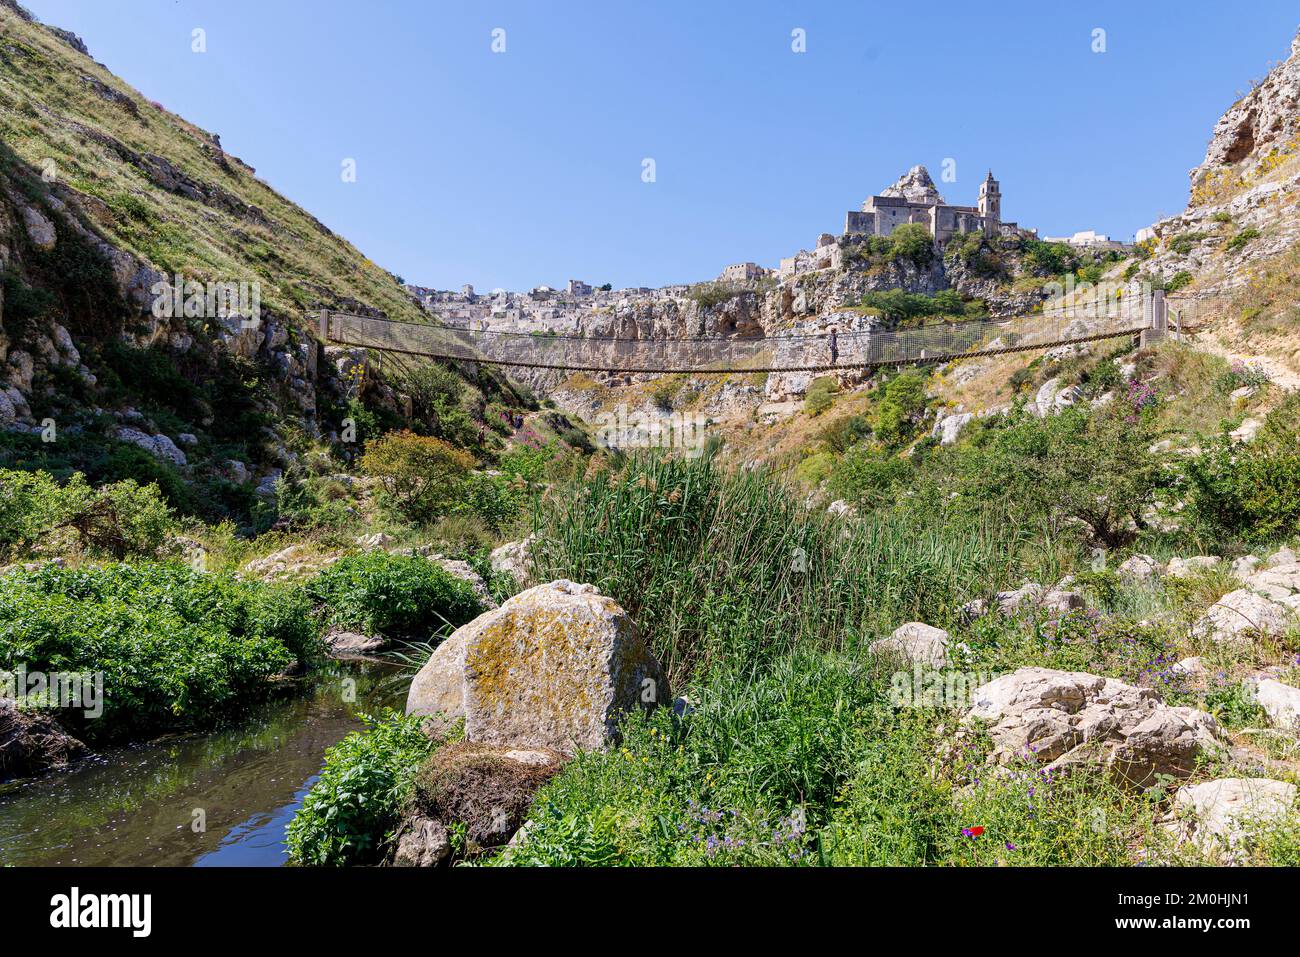 Italy, Basilicata, Matera, The Sassi and the park of the rupestrian churches listed as World Heritage by UNESCO Stock Photo